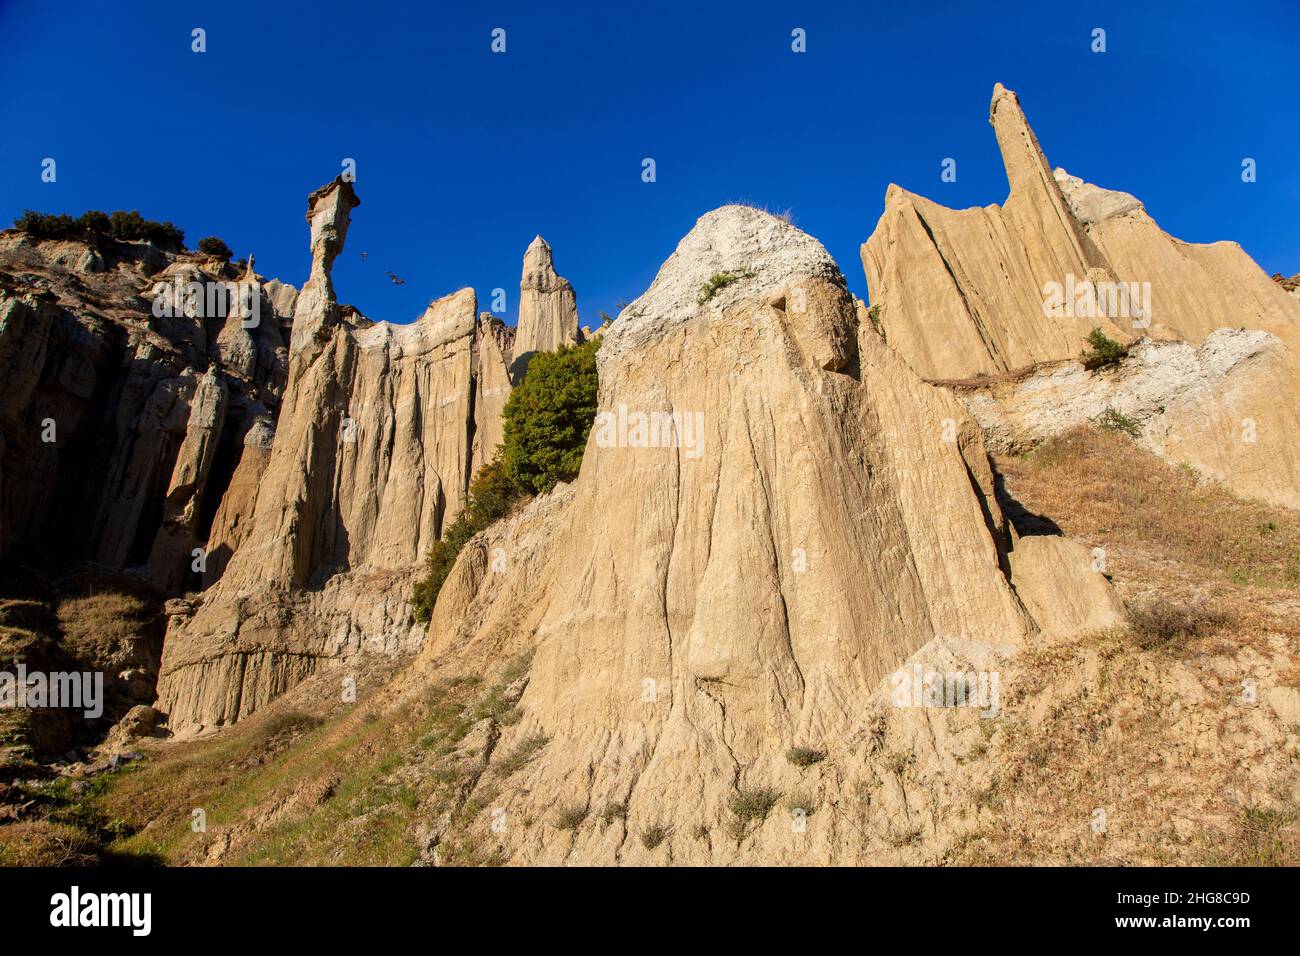 Volcanic rock patterns in the Kula district of Manisa Stock Photo